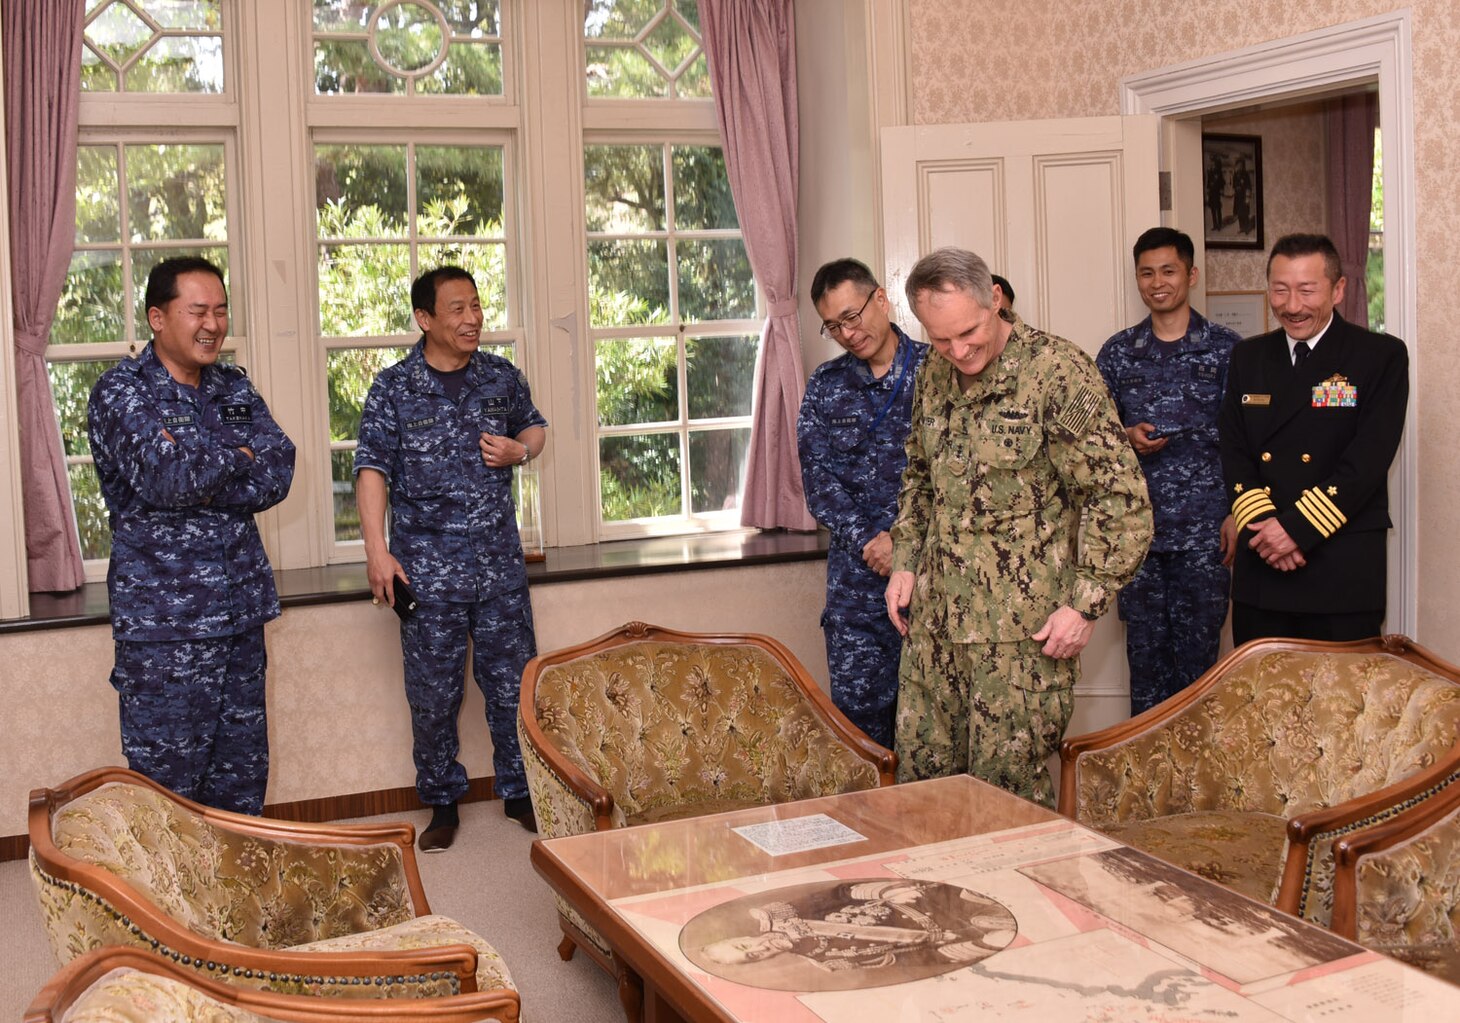 KYOTO, Japan (April 10, 2018) Vice. Adm. Phil Sawyer, commander, U.S. 7th Fleet, center, visits Togo-tei, the official residence of former Japanese Imperial Navy admiral Togo Heihachiro as a guest of Japan Maritime Self-Defense Force (JMSDF) Kazuki Yamashita, second from left, commandant of the JMSDF Yokosuka District and Vice Adm. Takehisa Nakao, commandant of the Maizuru District. Sawyer visited the Maizuru District headquarters in Kyoto to reinforce 7th Fleet’s close, long-standing partnership with the JMSDF throughout Japan.